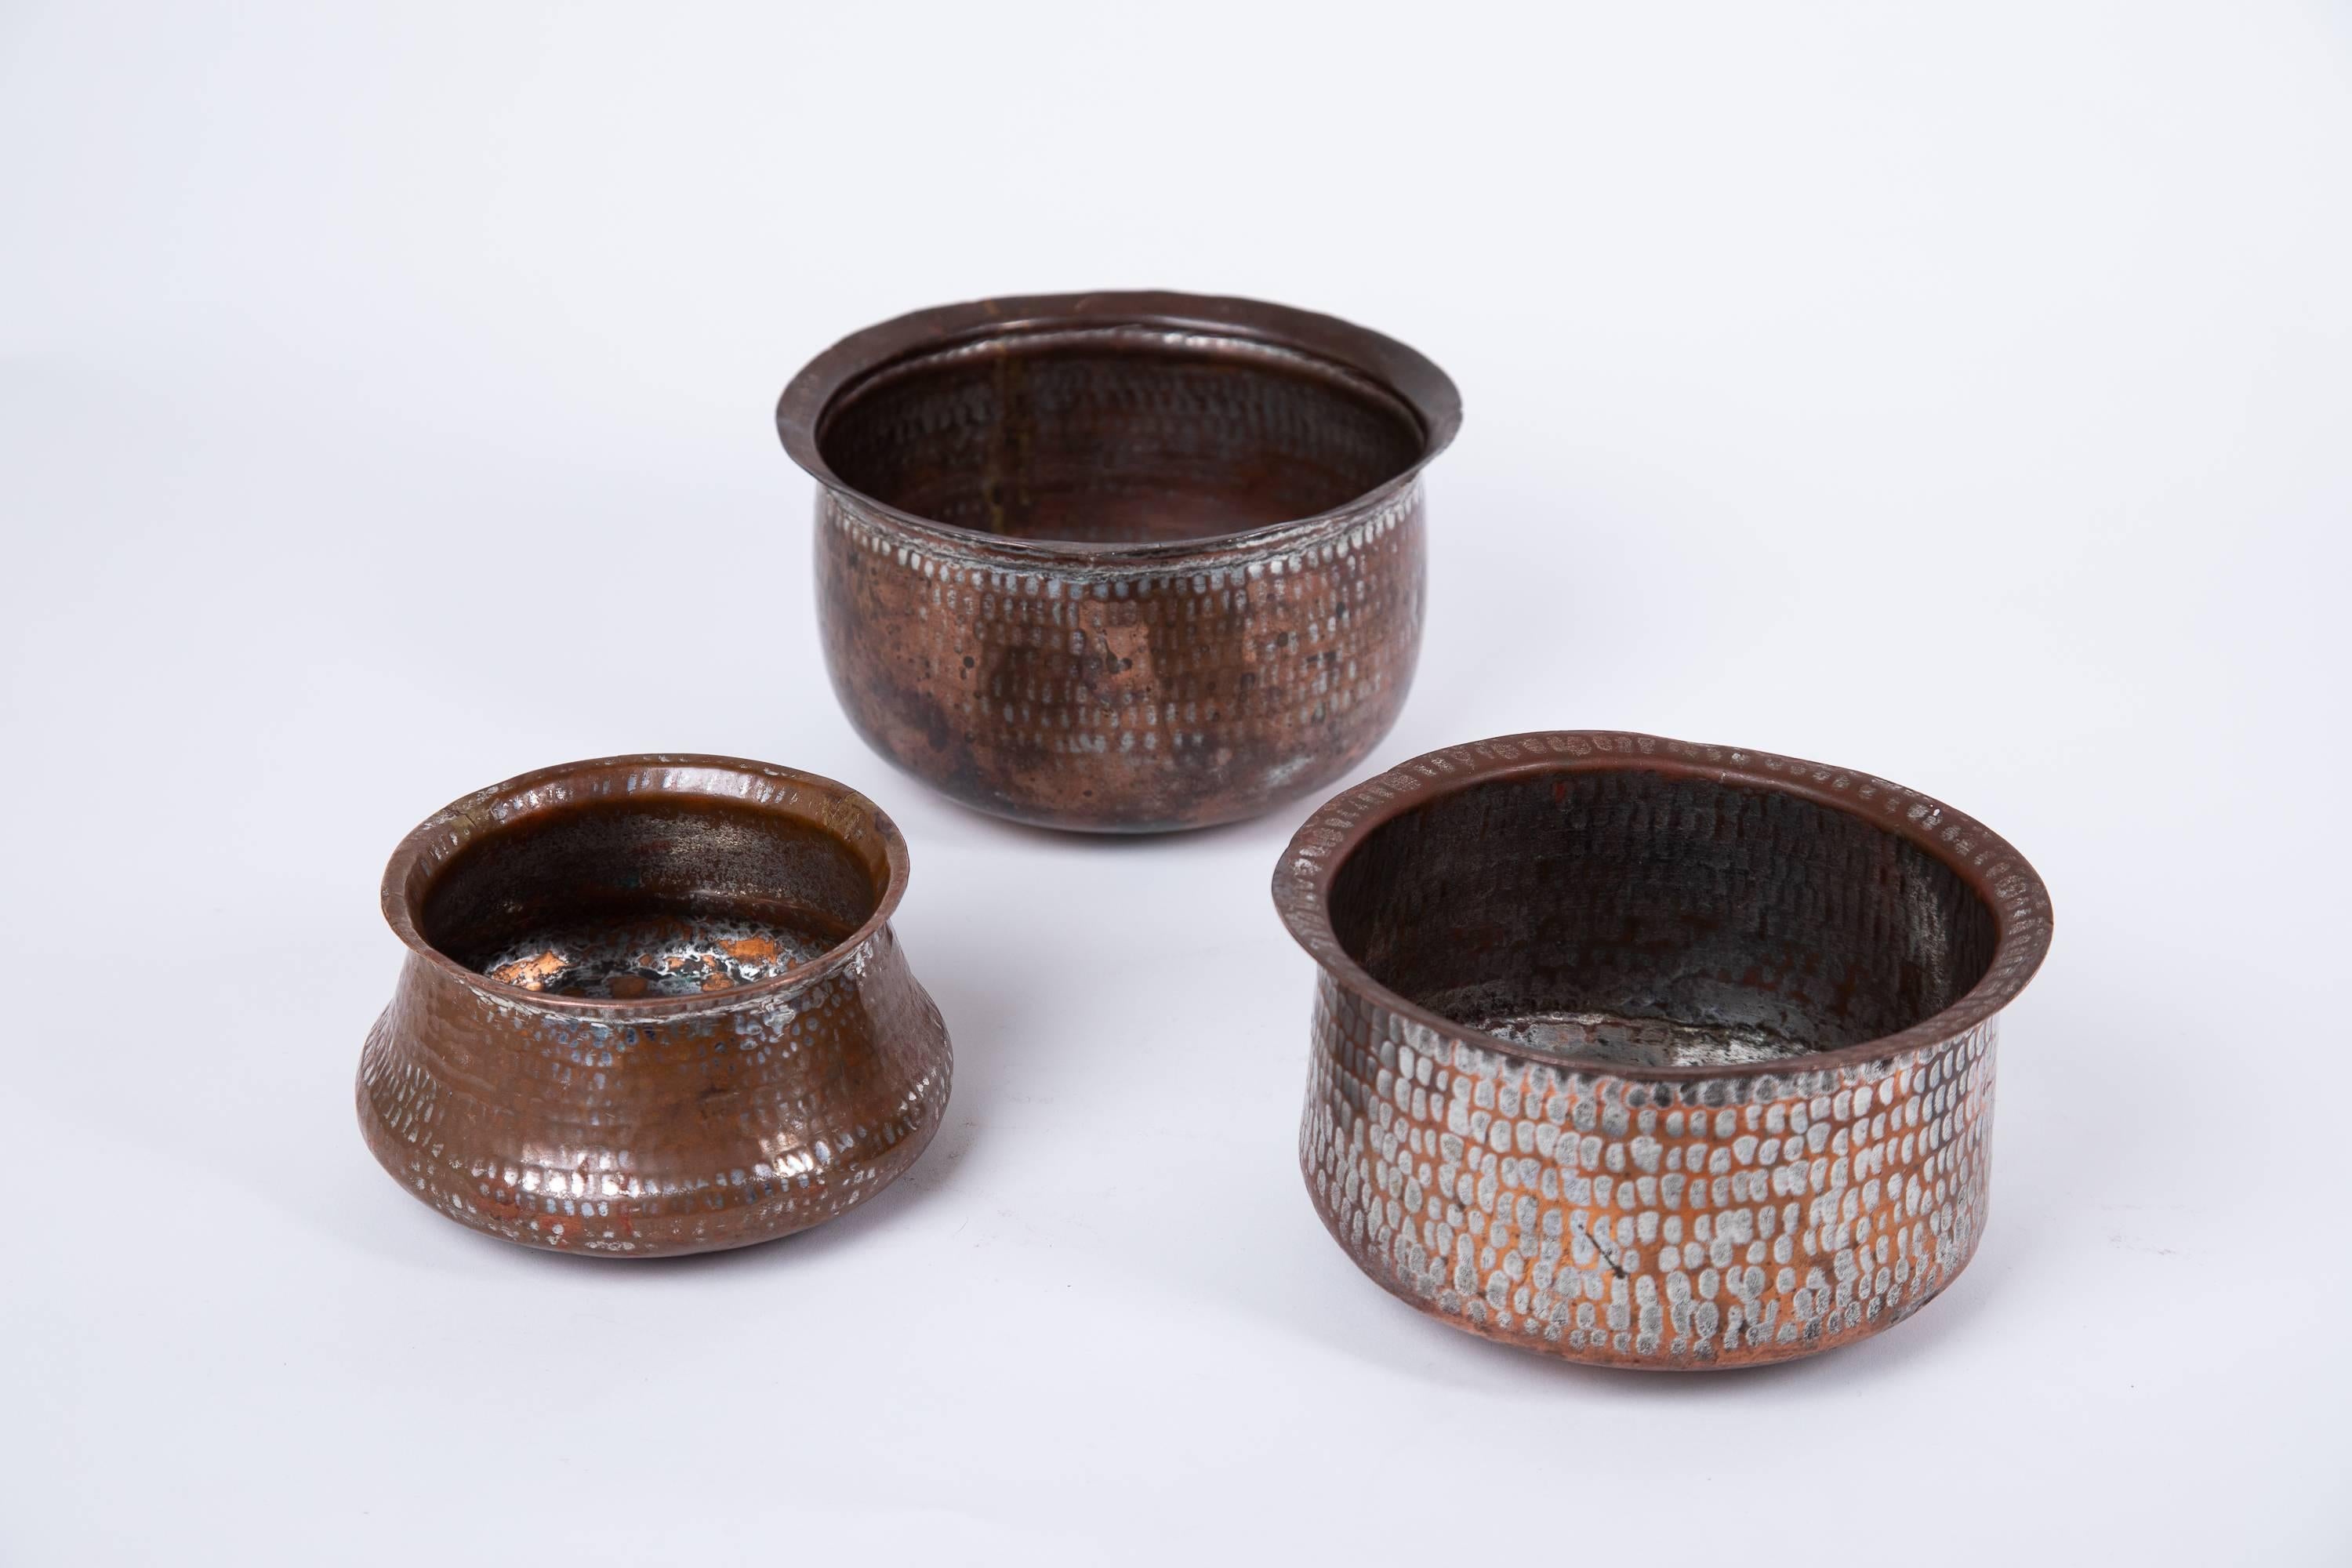  Set of three Indian hand wrought copper vessels.
 The metal wash over copper highlights the hammered vessels beautifully.
 Each vessel has a unique size. They measure from large to small:
 3.8